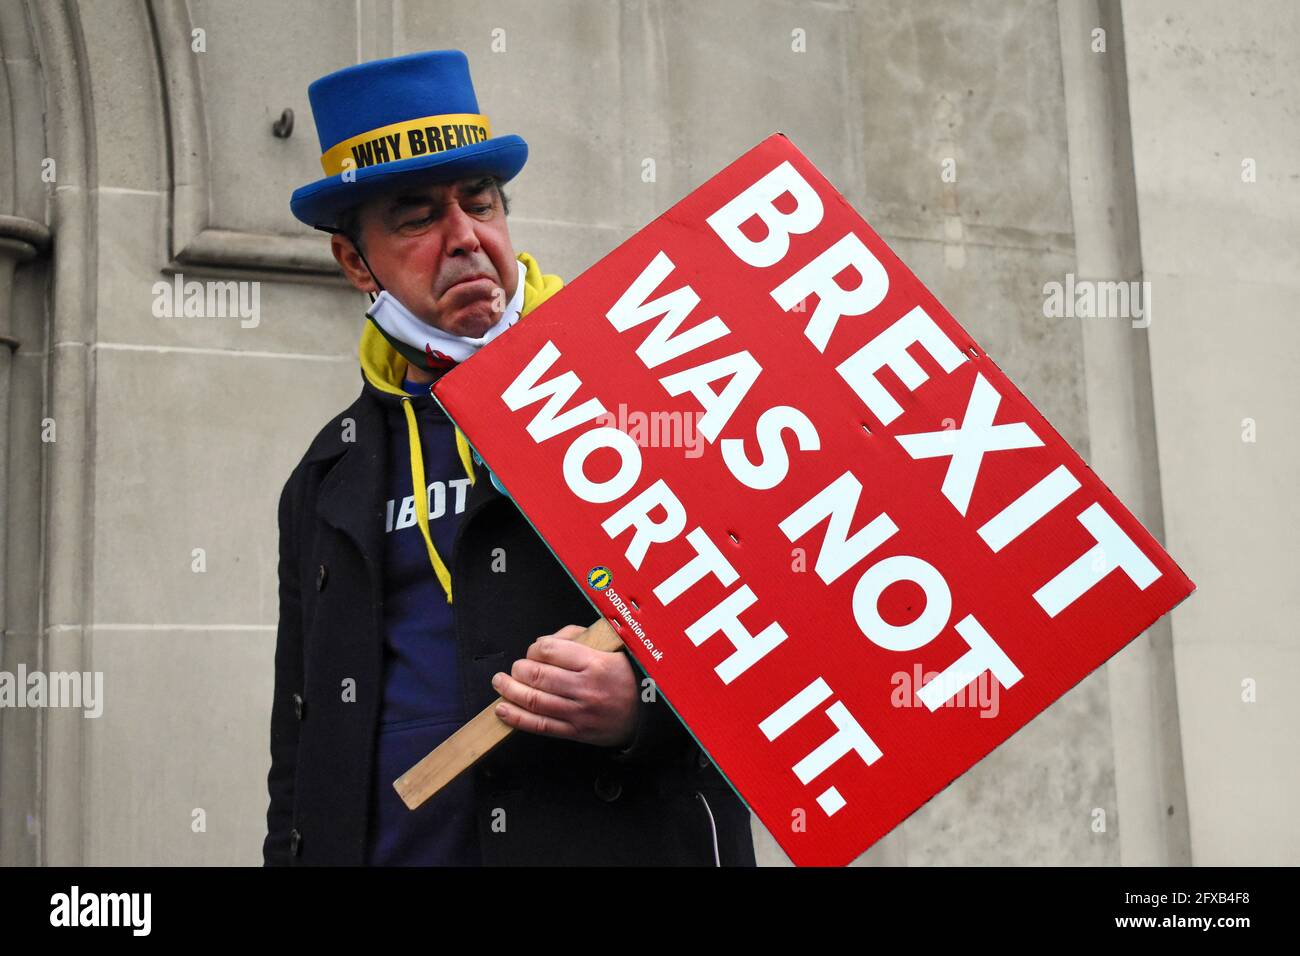 London, UK. 26th May, 2021. Protestors outside Dominic Cummings committee appearance in Whitehall. Steven Bray is a British activist from Port Talbot in South Wales, who in 2018 and 2019 made daily protests against Brexit in College Green, Westminster. He is variously known as Stop Brexit Man, Mr Stop Brexit or the Stop Brexit guy. Credit: JOHNNY ARMSTEAD/Alamy Live News Stock Photo